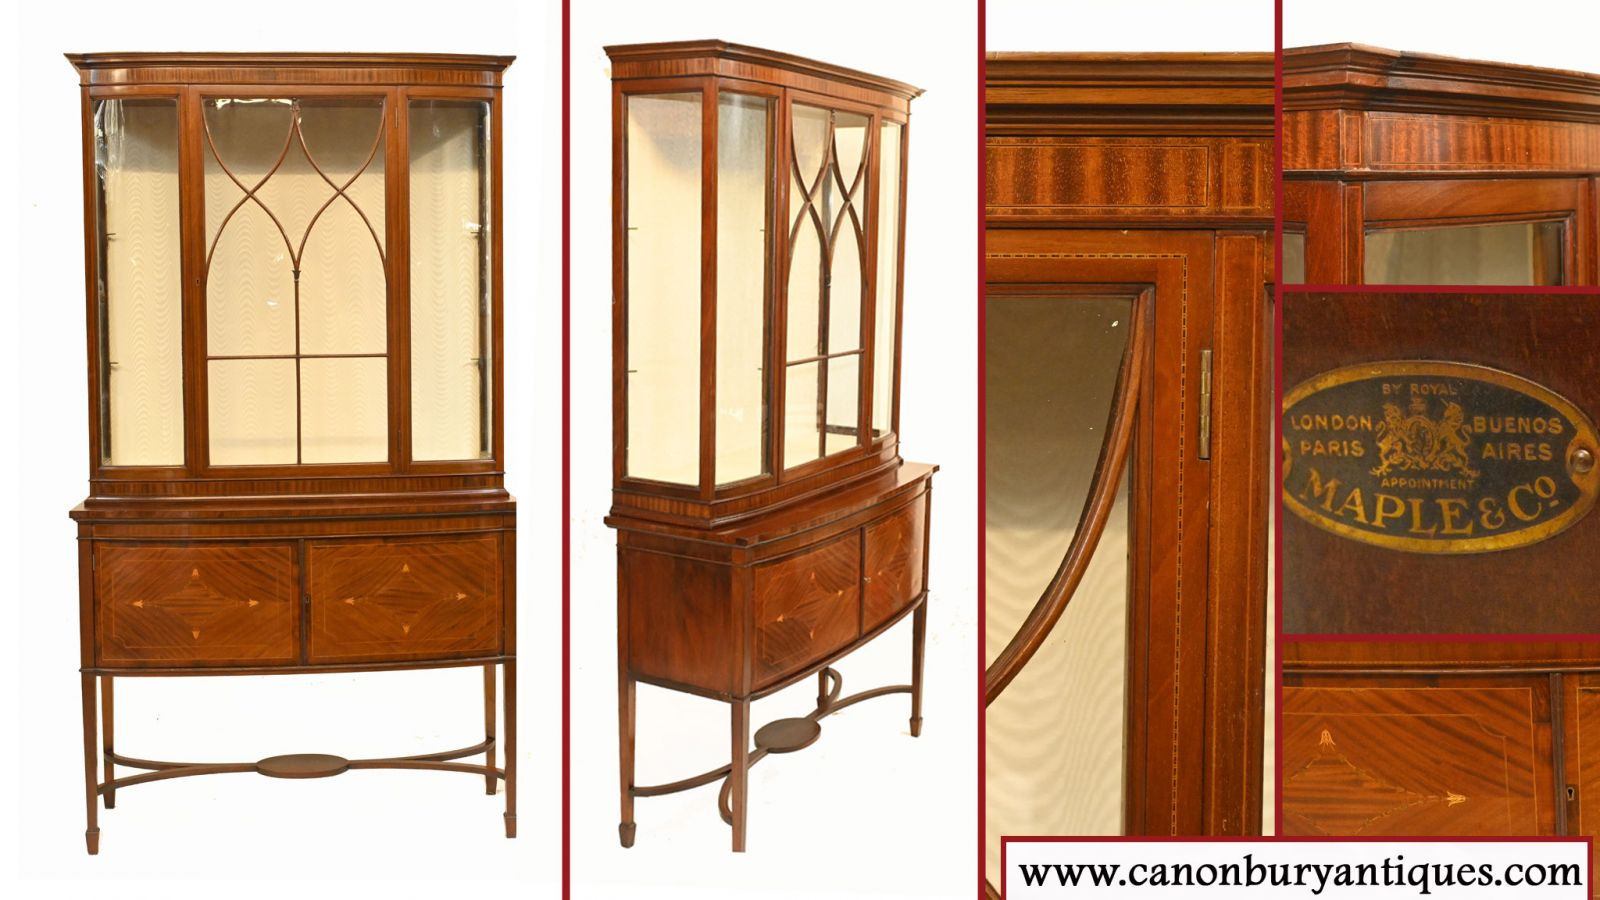 Antique Display Cabinet Mahogany Maple and Co 1920